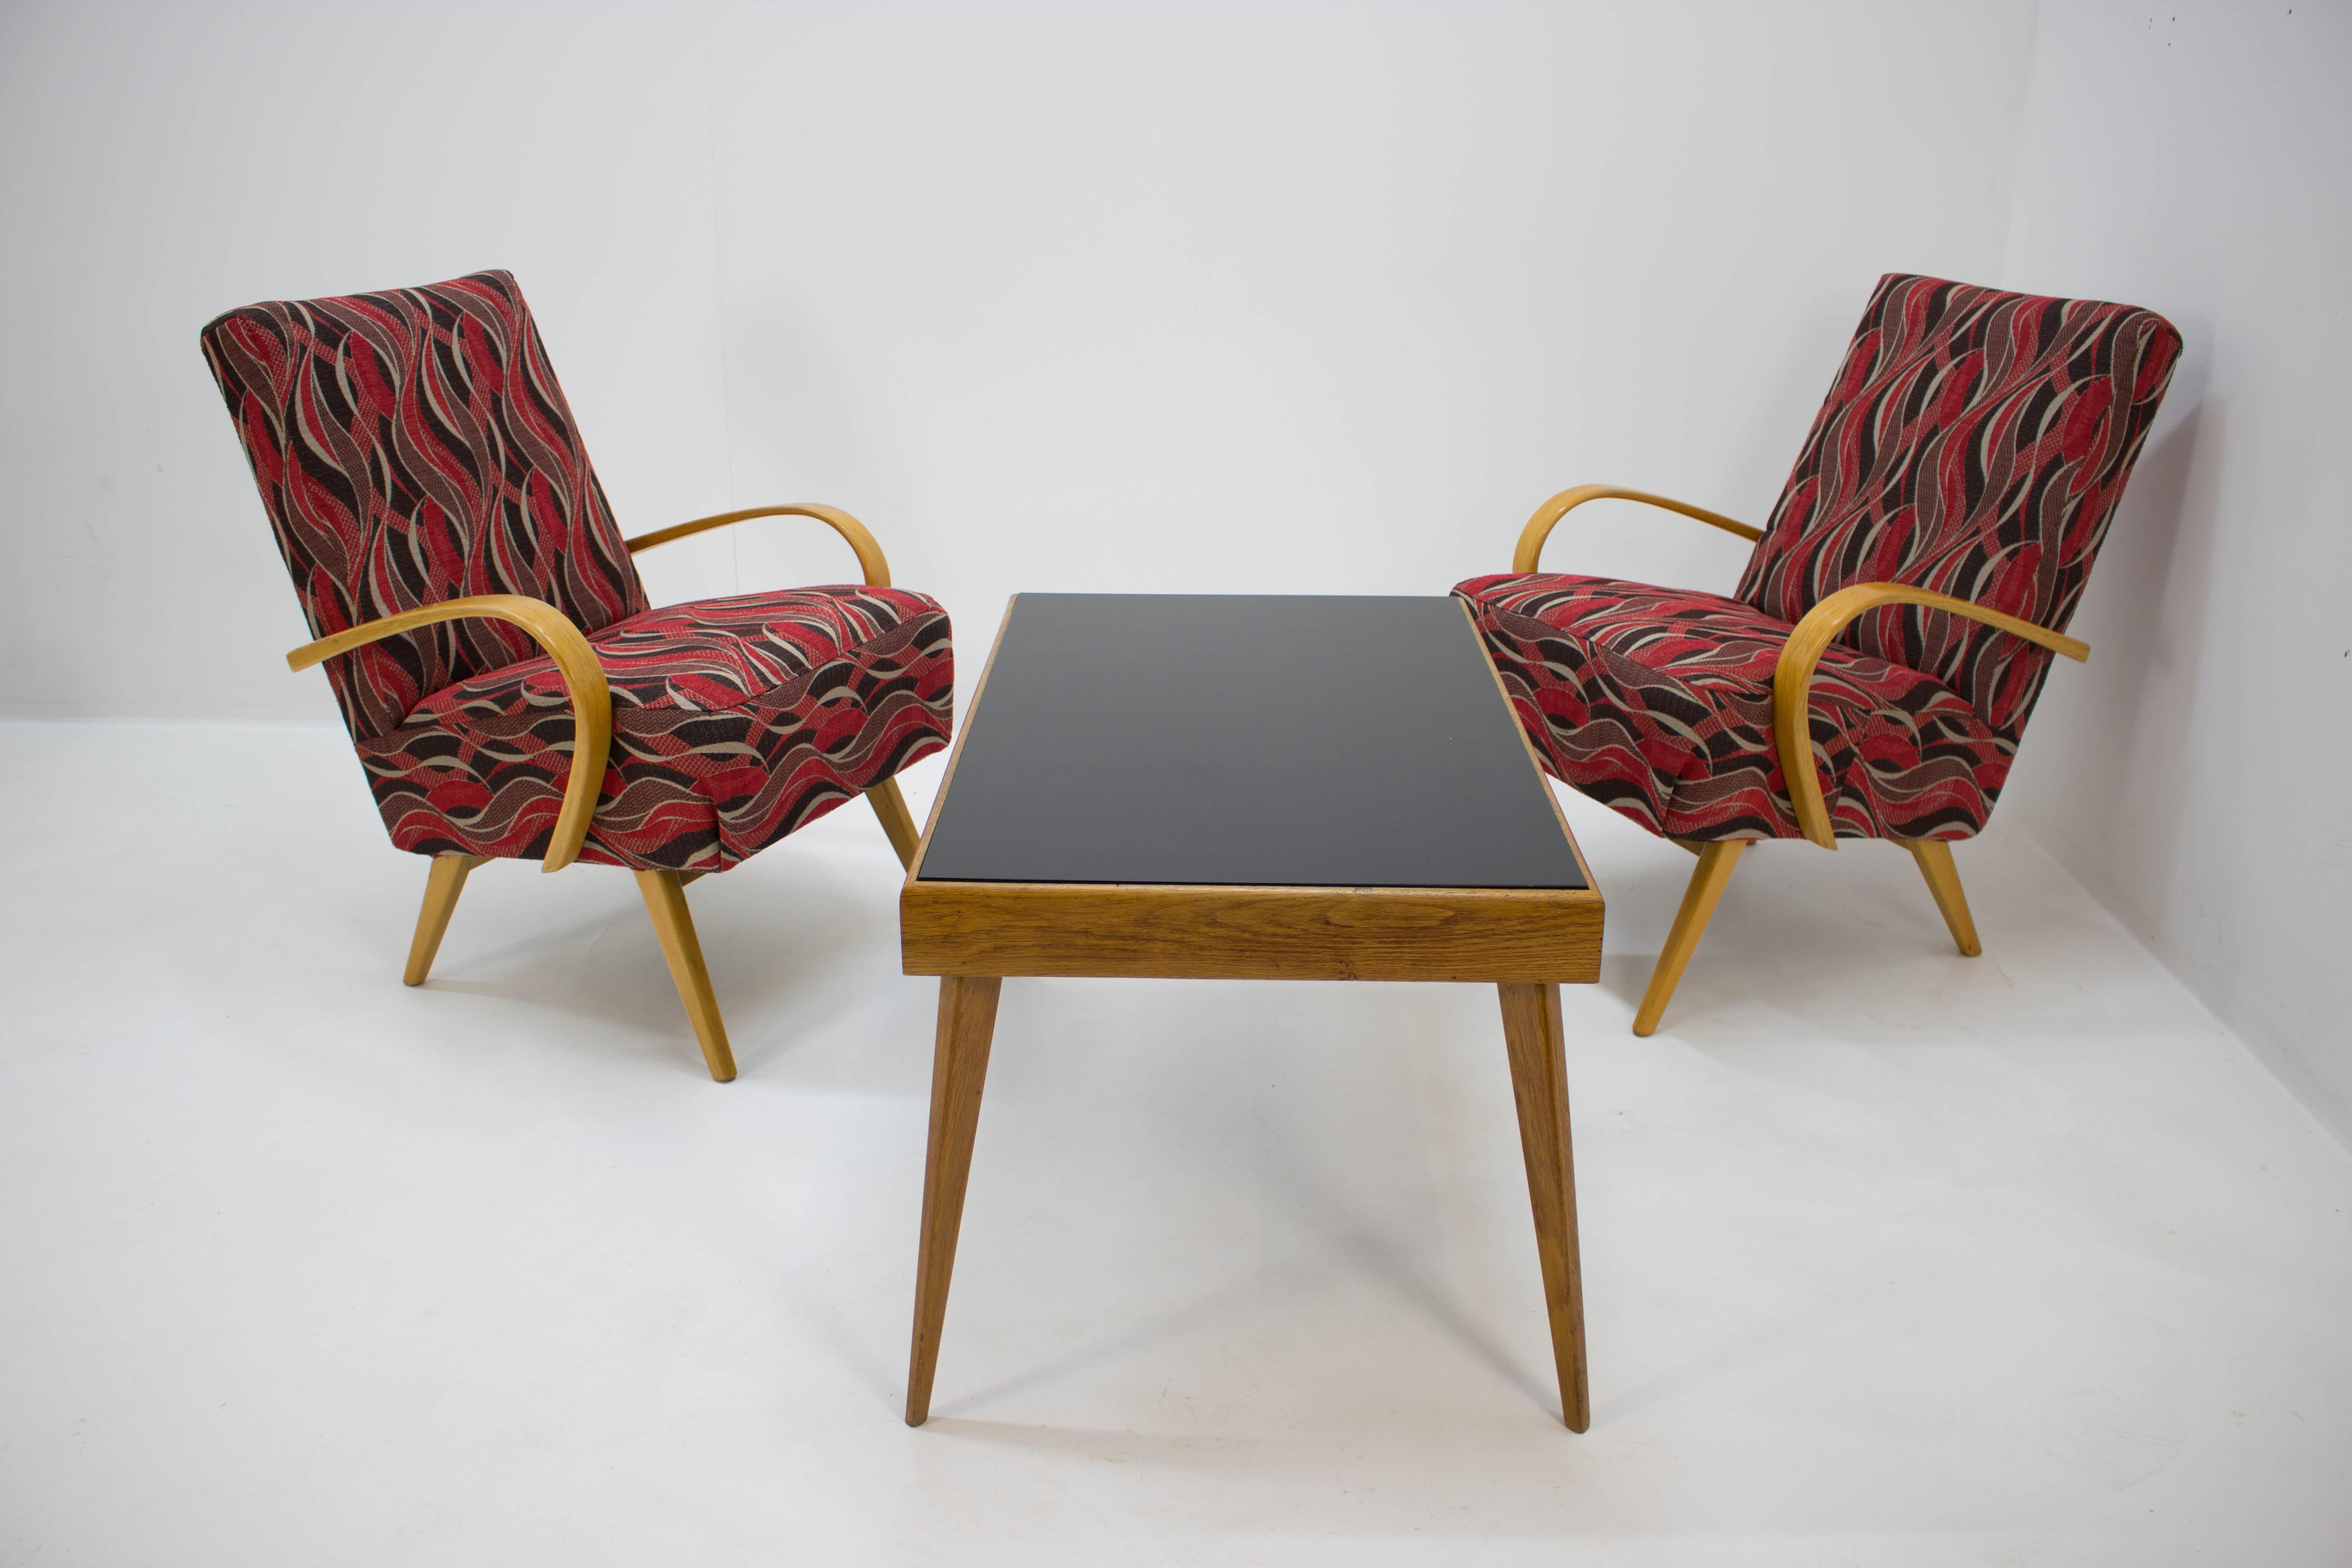 This is a pair of type 53 armchairs and coffee table designed by architect Jaroslav Smidek and manufactured by TON during the 1960s. It features a bent beech frame and crazy timeless colored upholstery. This piece represents the Brussels style,